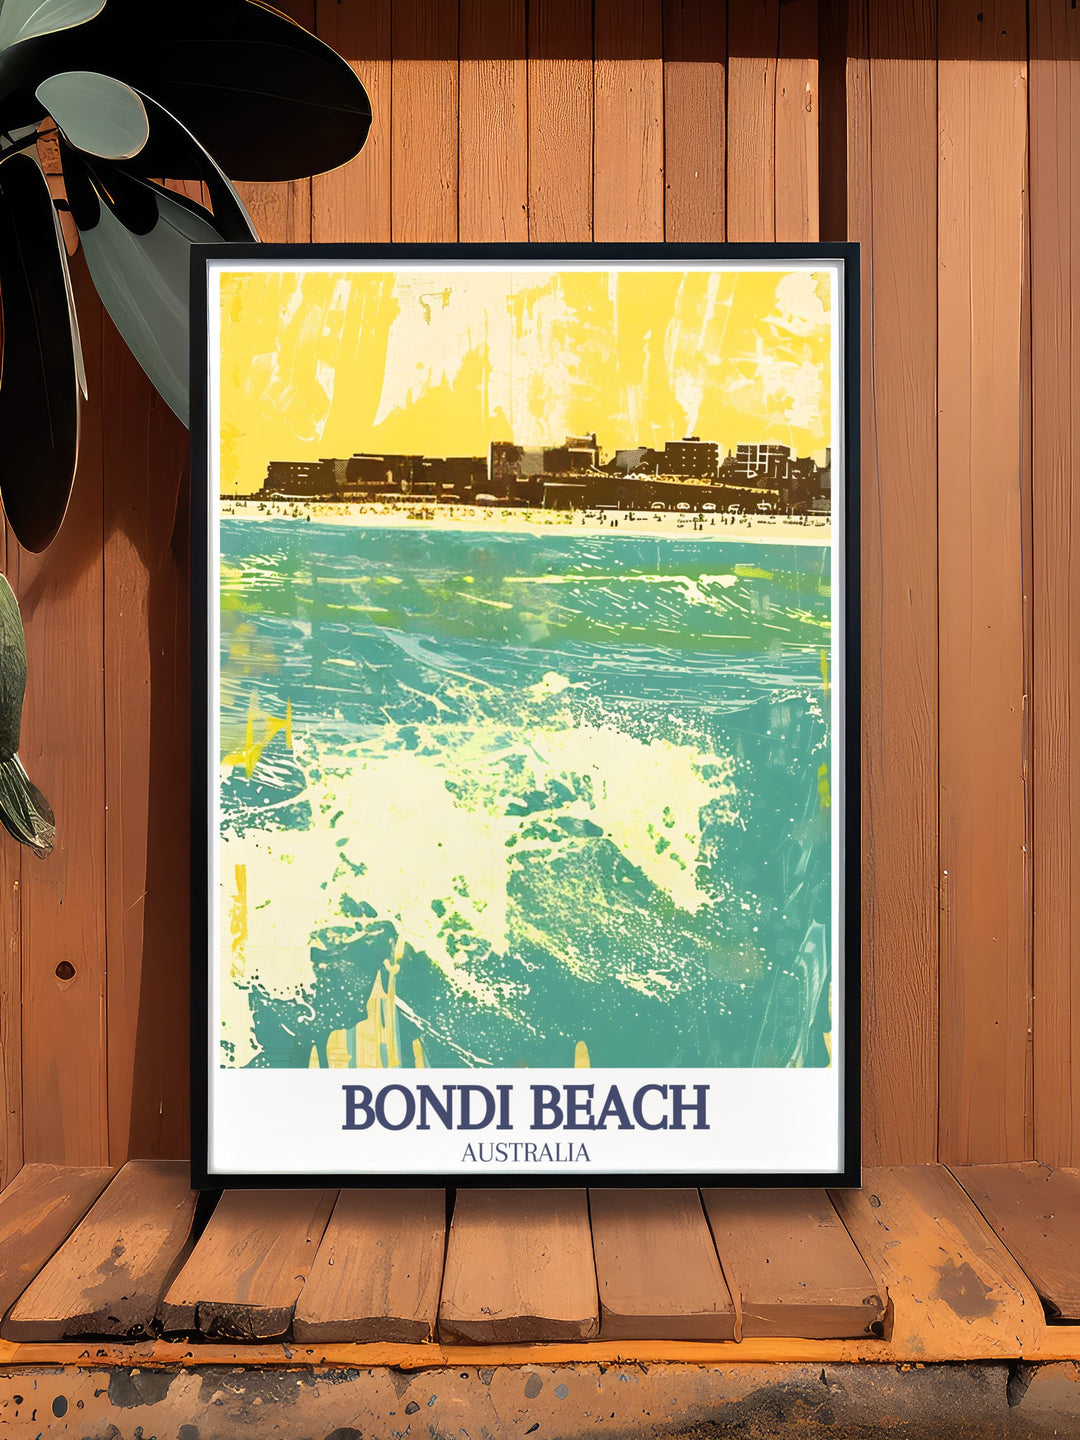 Framed print of Sydney Harbour highlighting the architectural beauty of the Sydney Opera House and Harbour Bridge. Bondi, South Bondi Beach artwork captures the essence of the beachs dynamic atmosphere, perfect for enhancing your interior design.